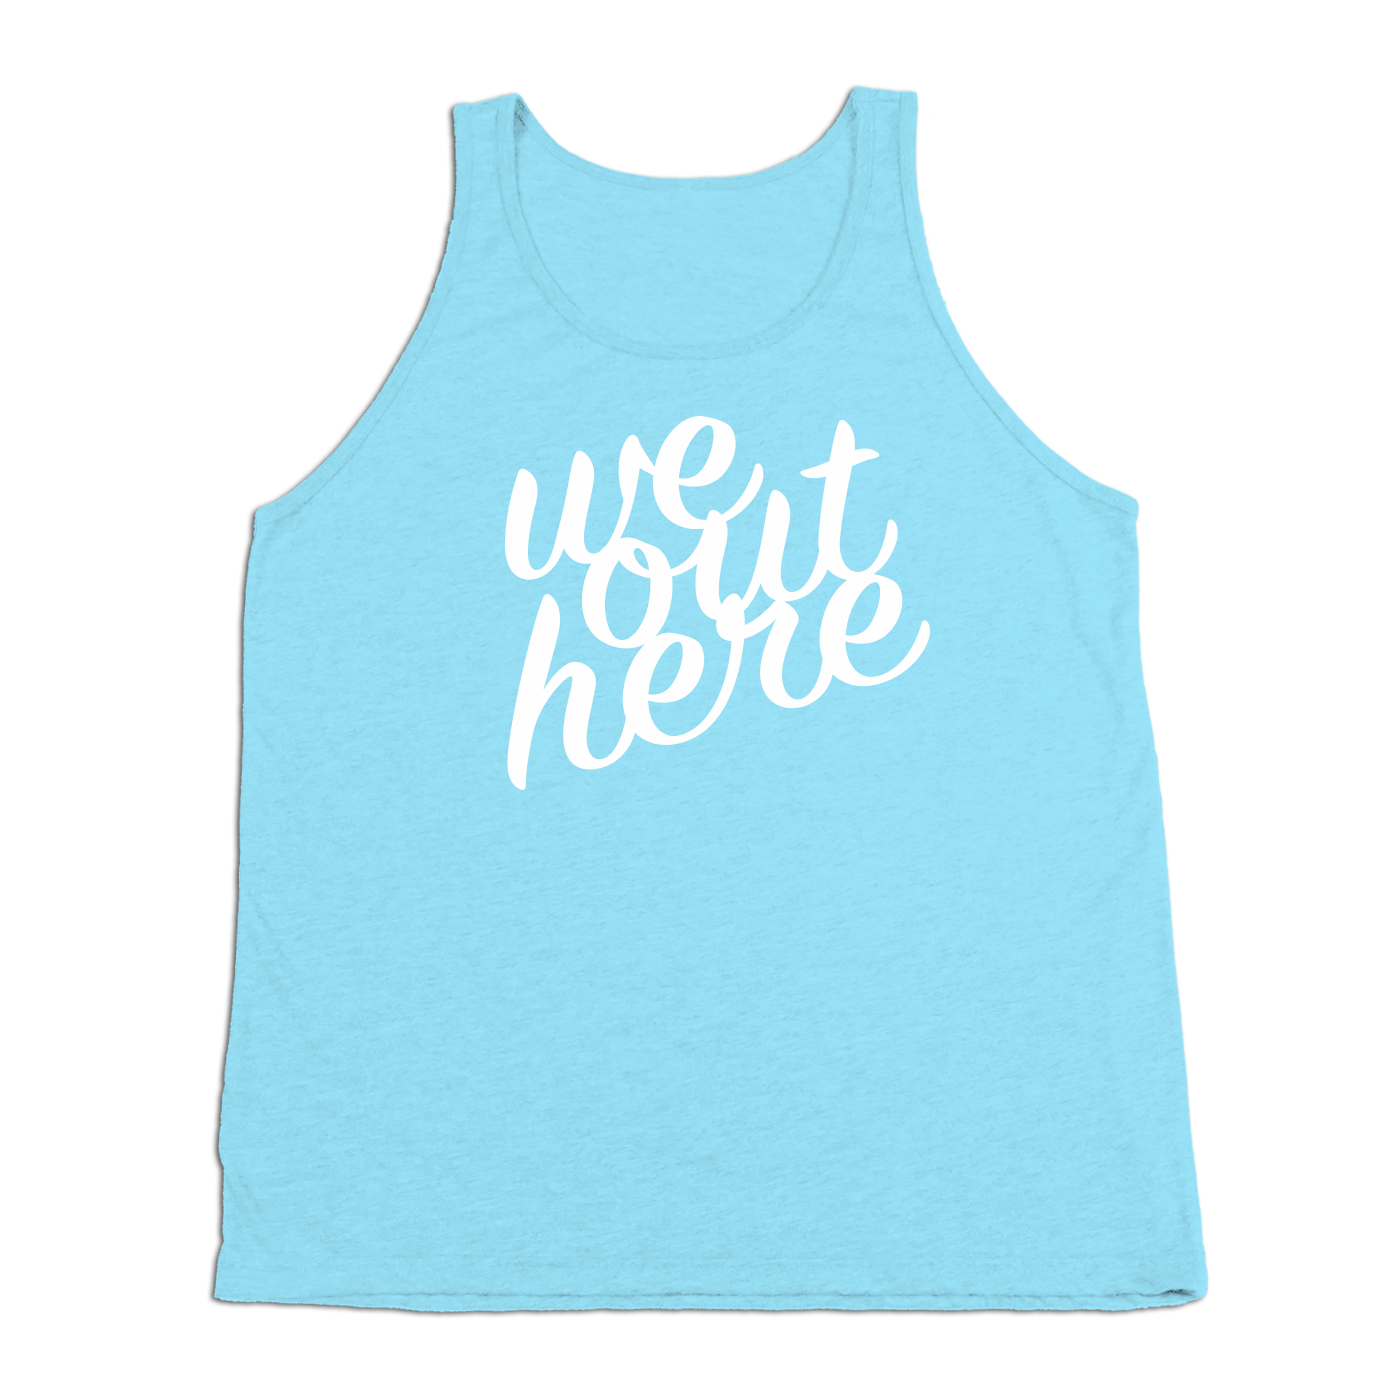 #WEOUTHERE TriBlend Tank Top - Hat Mount for GoPro